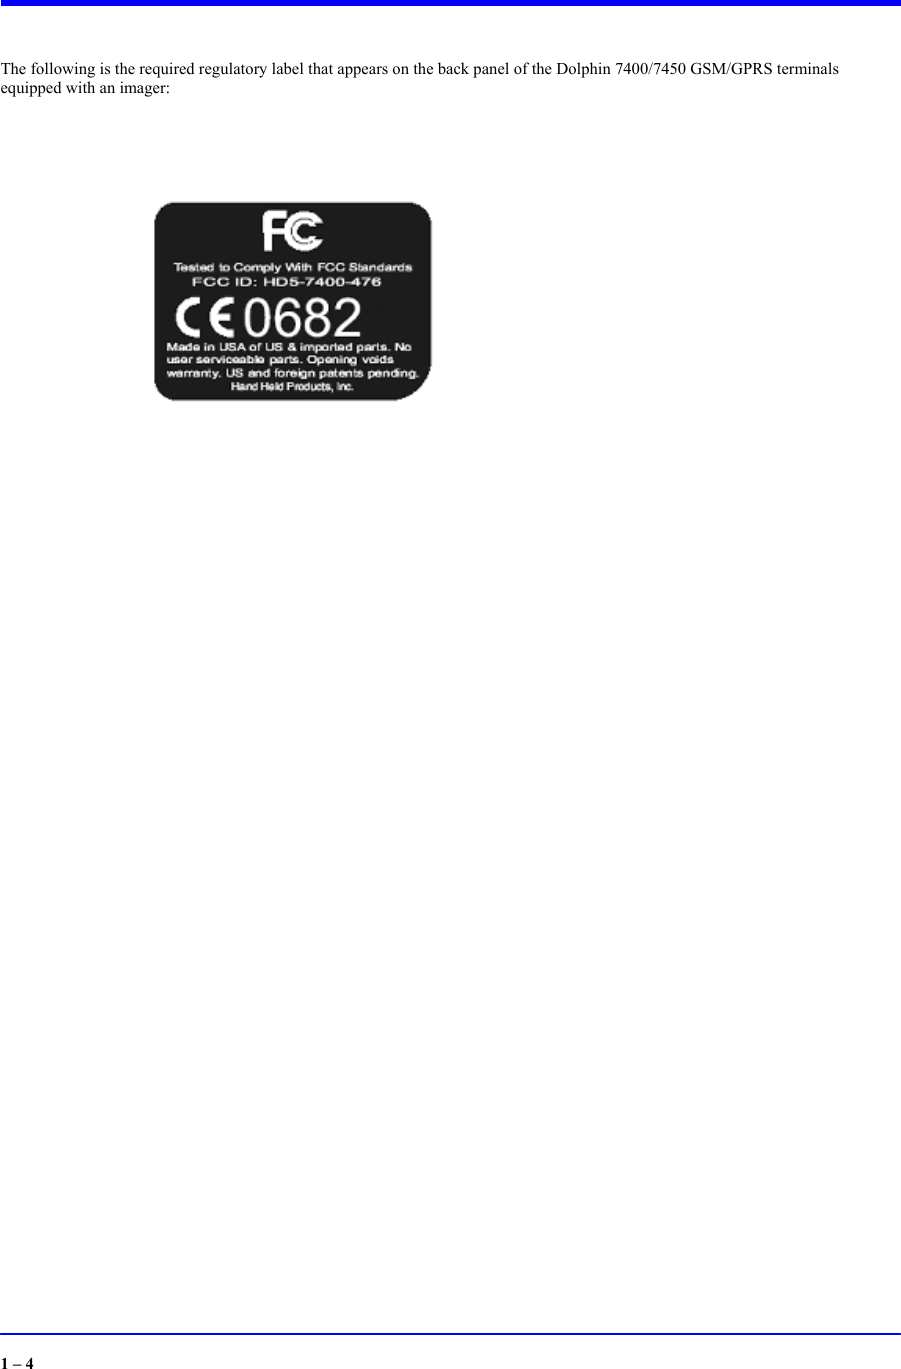  The following is the required regulatory label that appears on the back panel of the Dolphin 7400/7450 GSM/GPRS terminals equipped with an imager:                                          1 – 4  